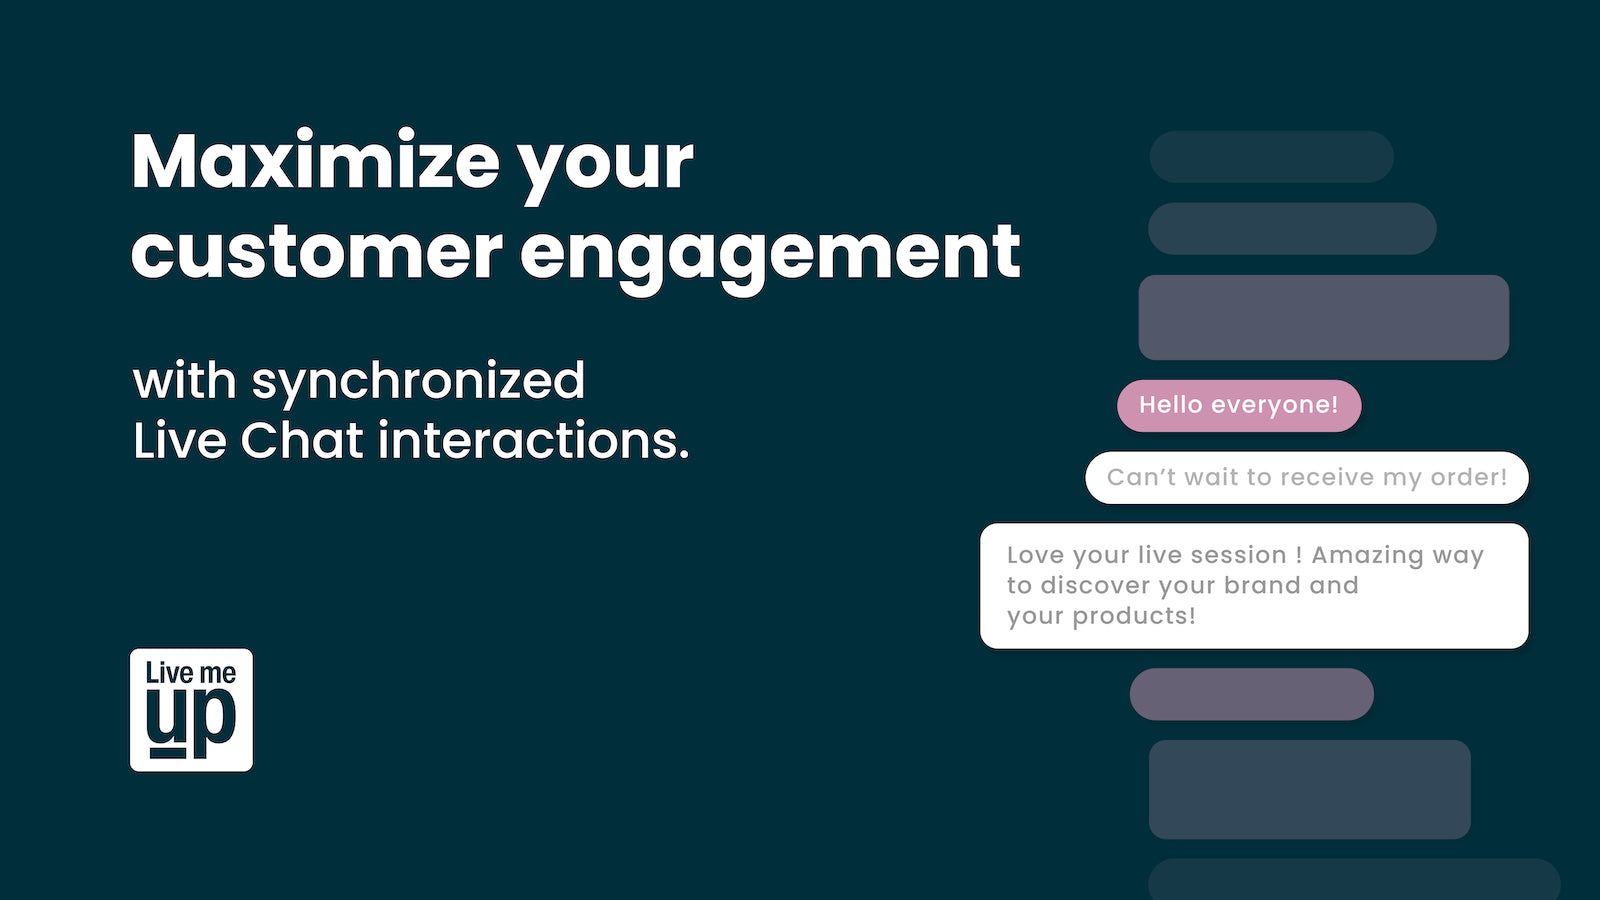 Maximize your customer engagement